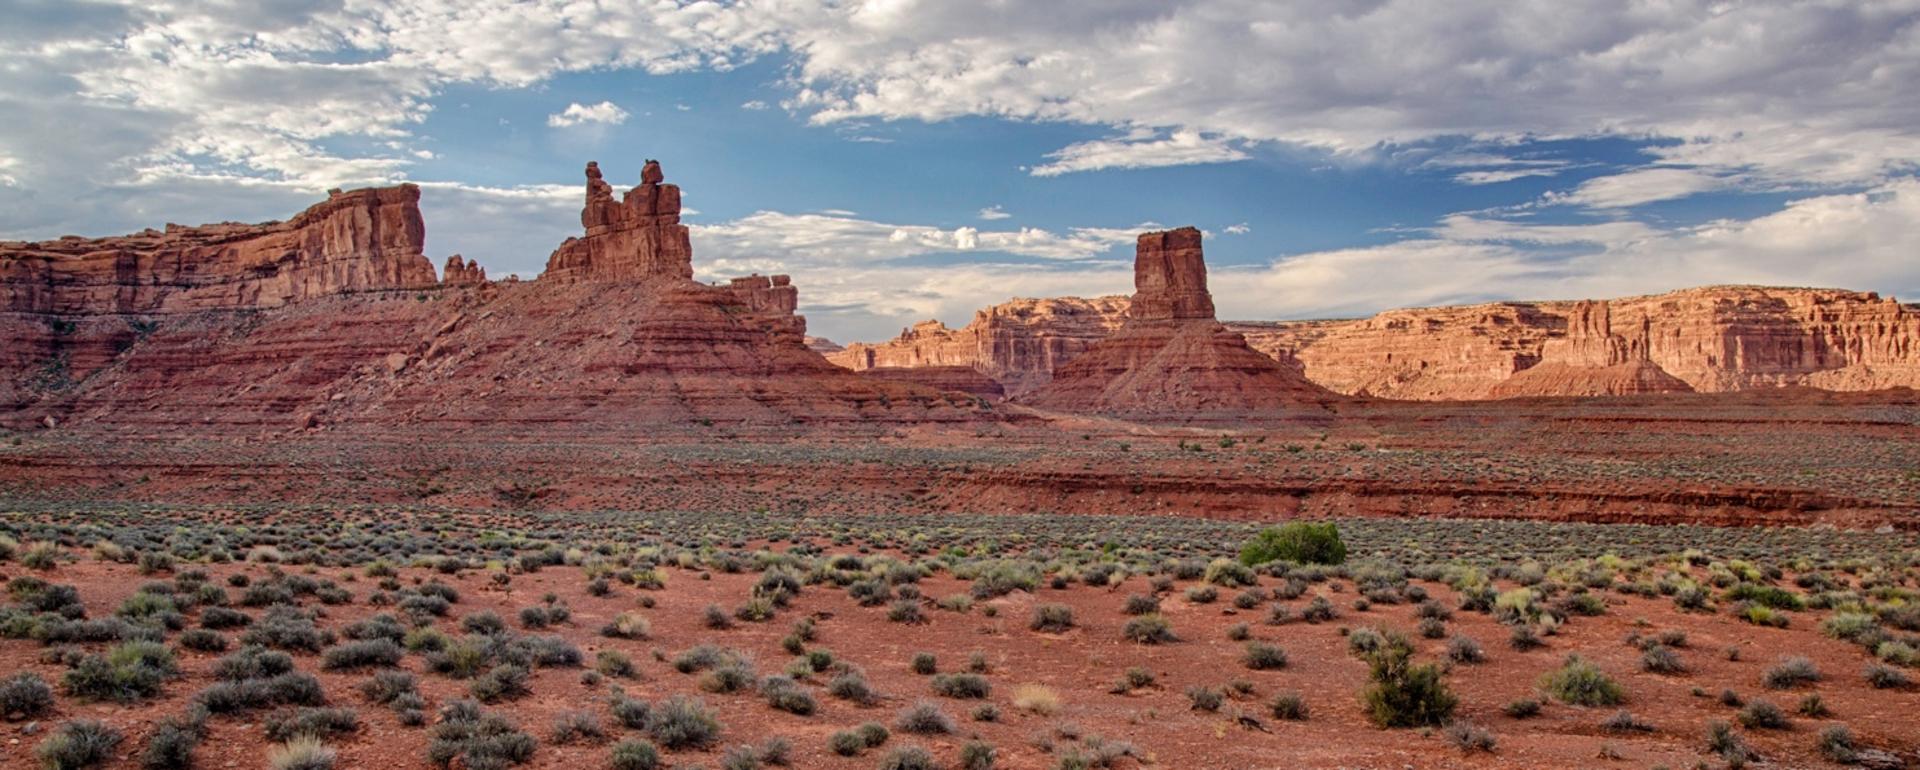 Valley of the Gods, stripped of monument protection